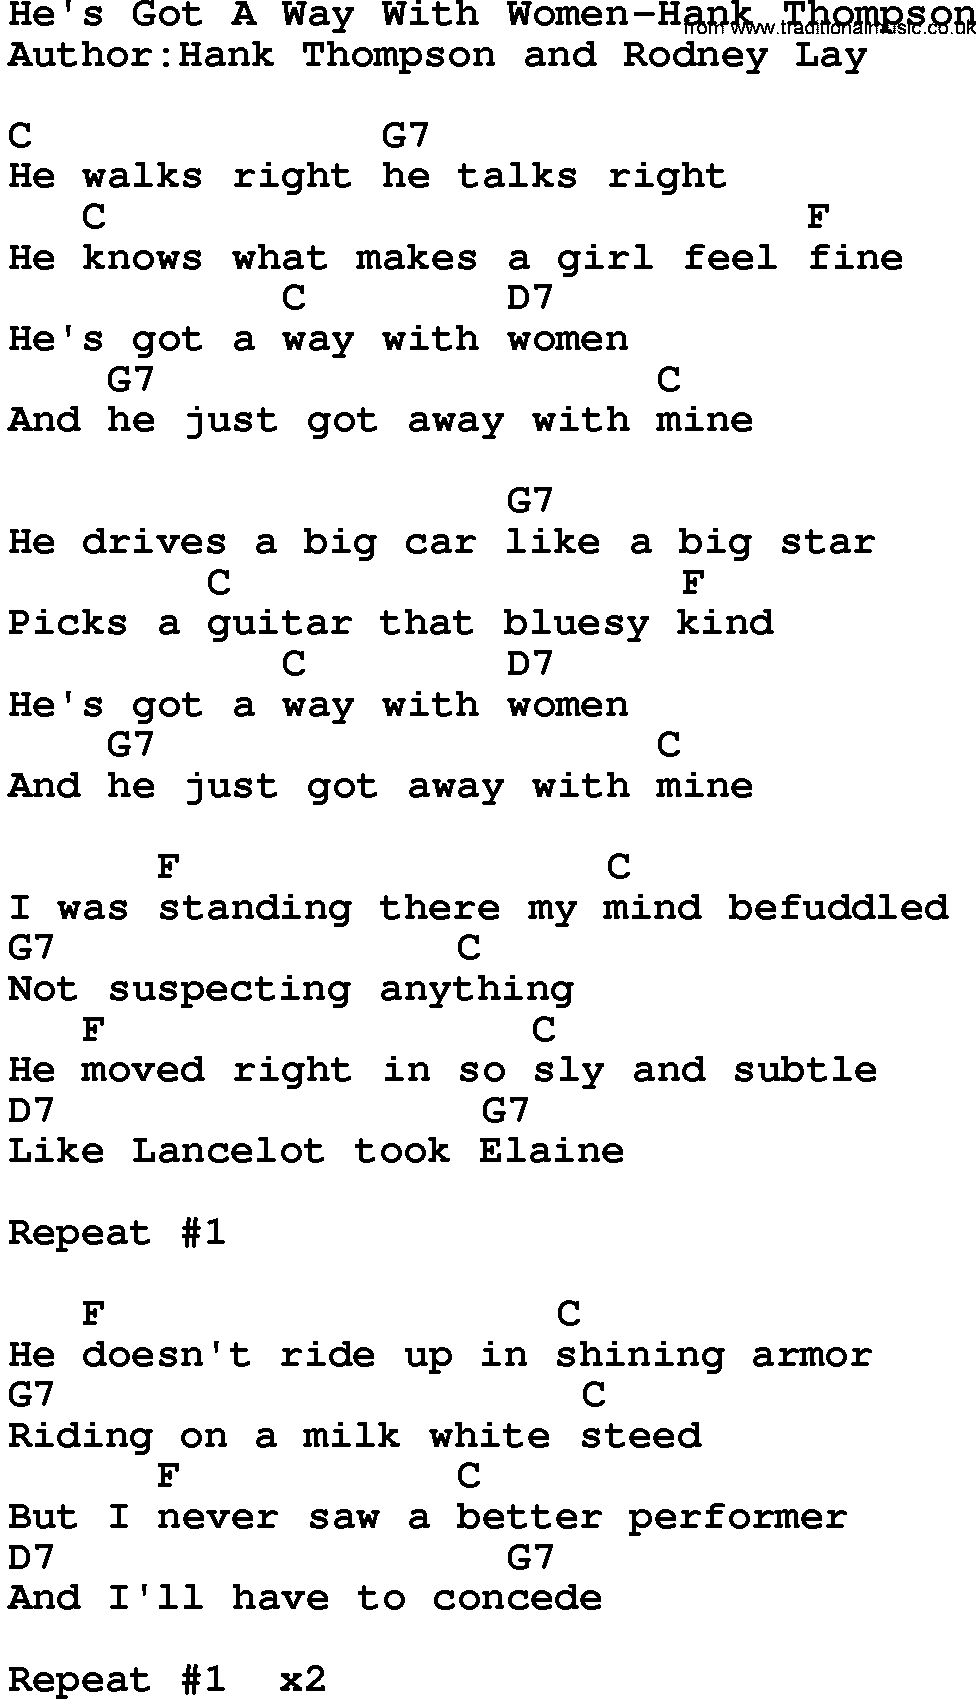 Country music song: He's Got A Way With Women-Hank Thompson lyrics and chords